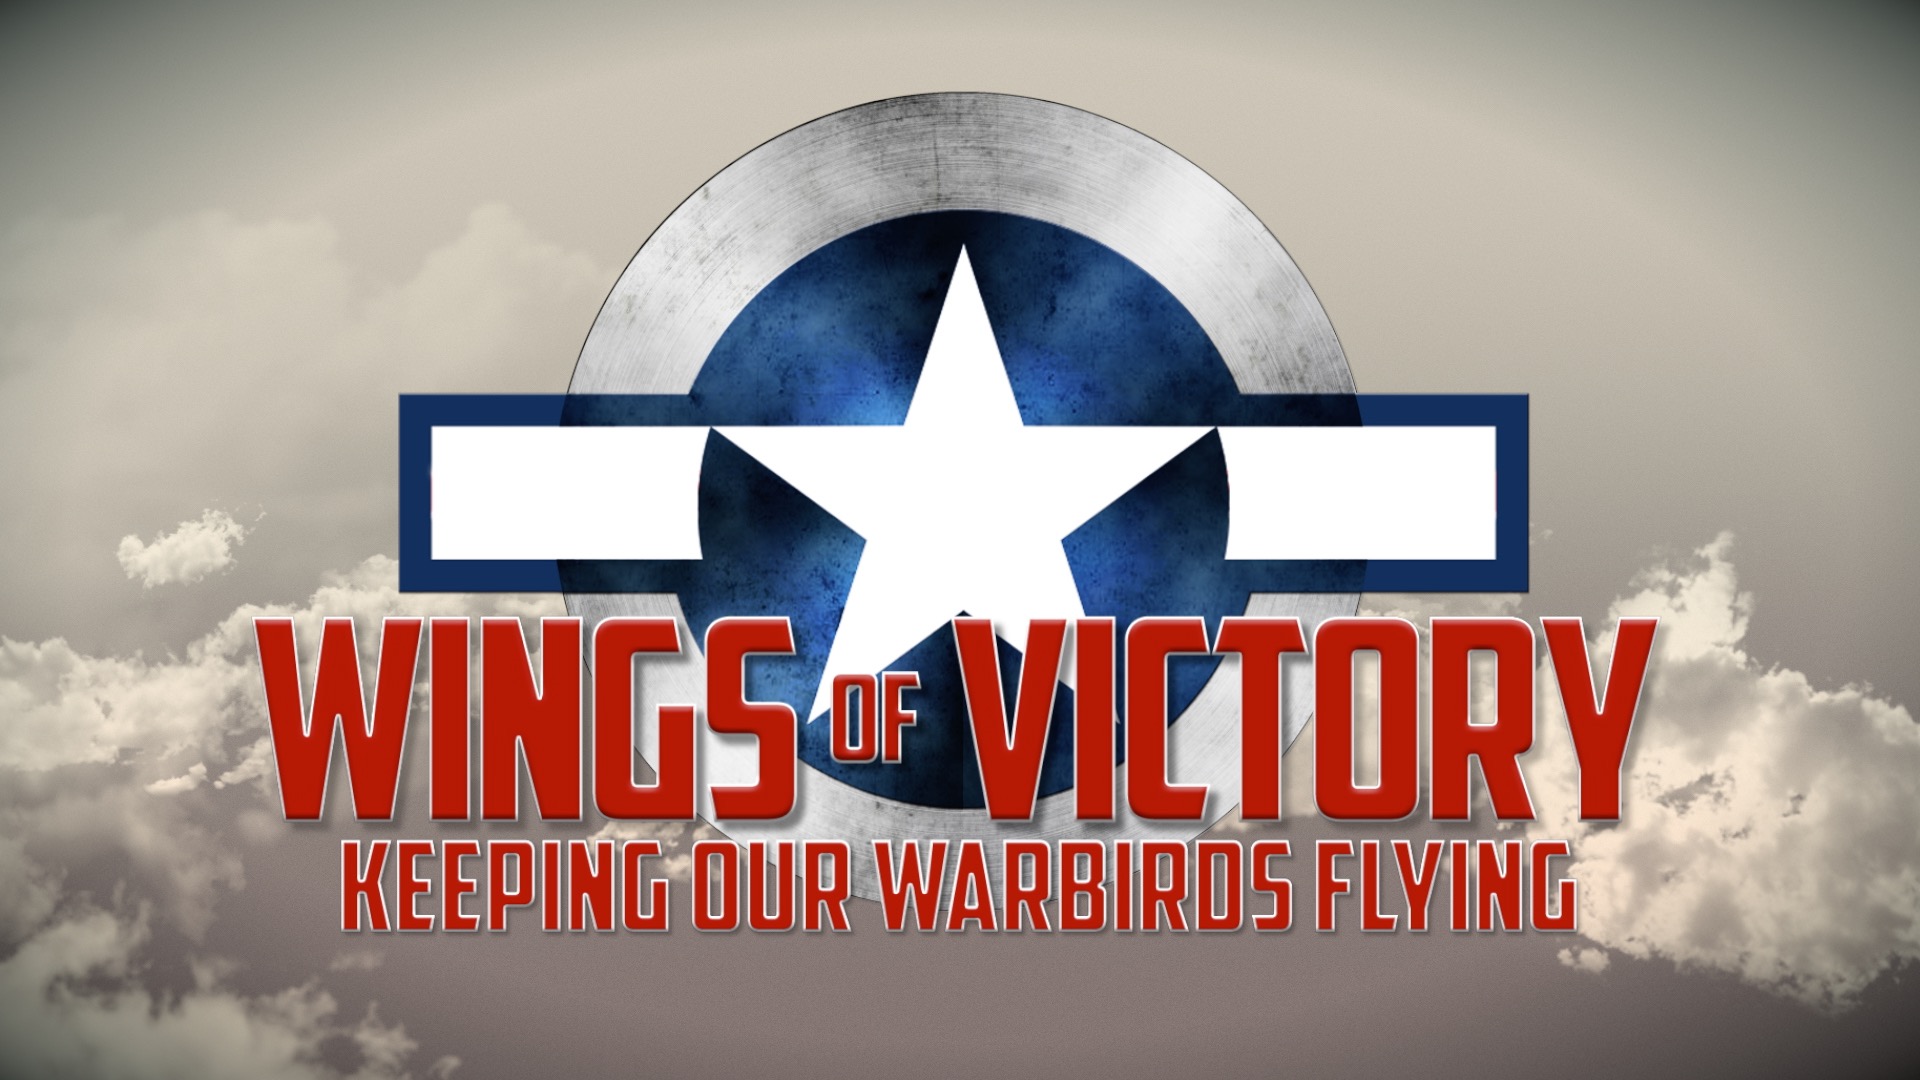 Documentary: Wings of Victory - Keeping our Warbirds Flying airs on Veterans Day at Daytona State